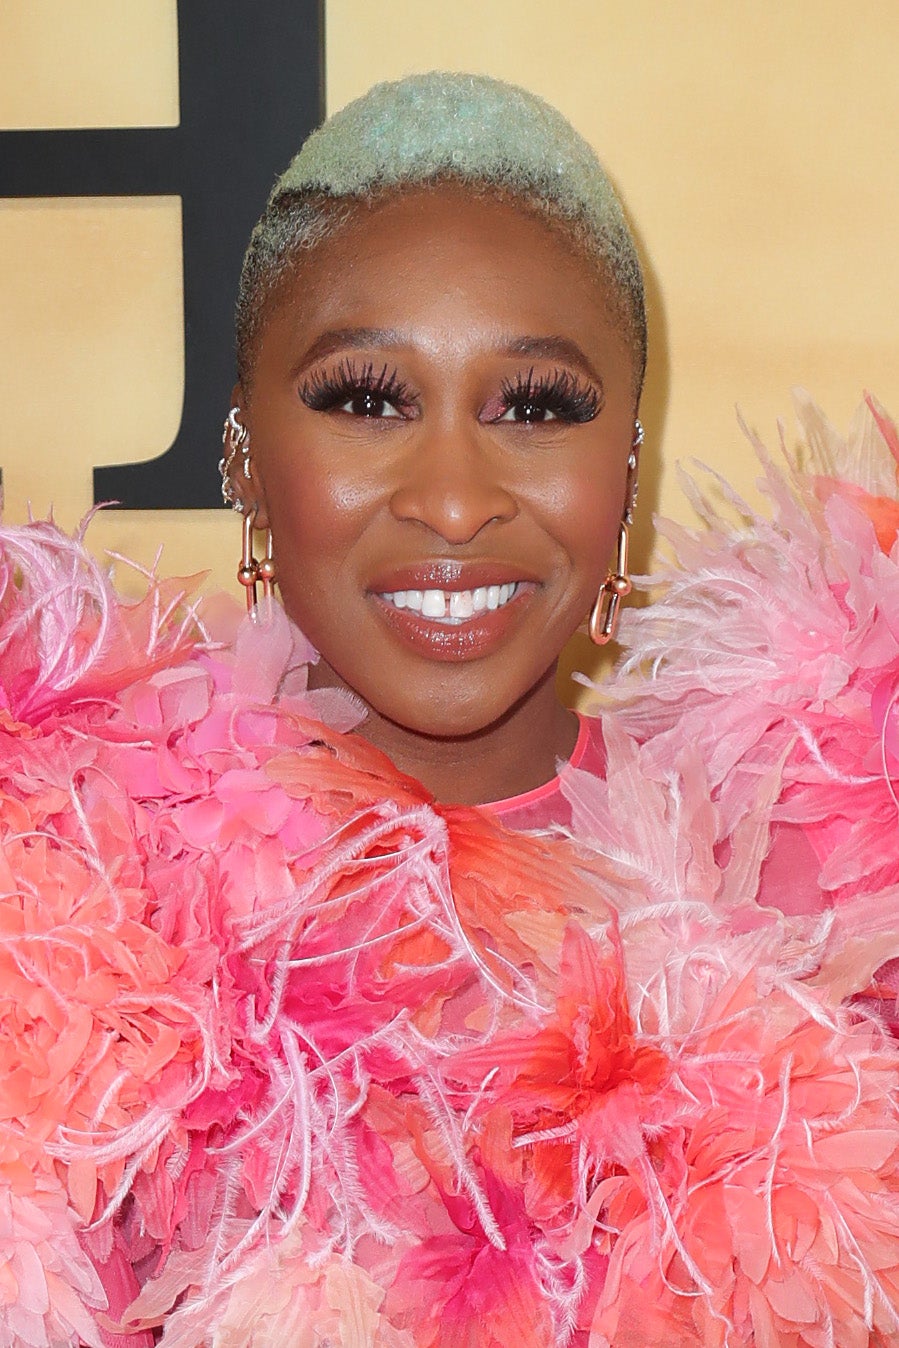 Cynthia Erivo Stays Red Carpet Ready With Her Beauty And We Have The Receipts